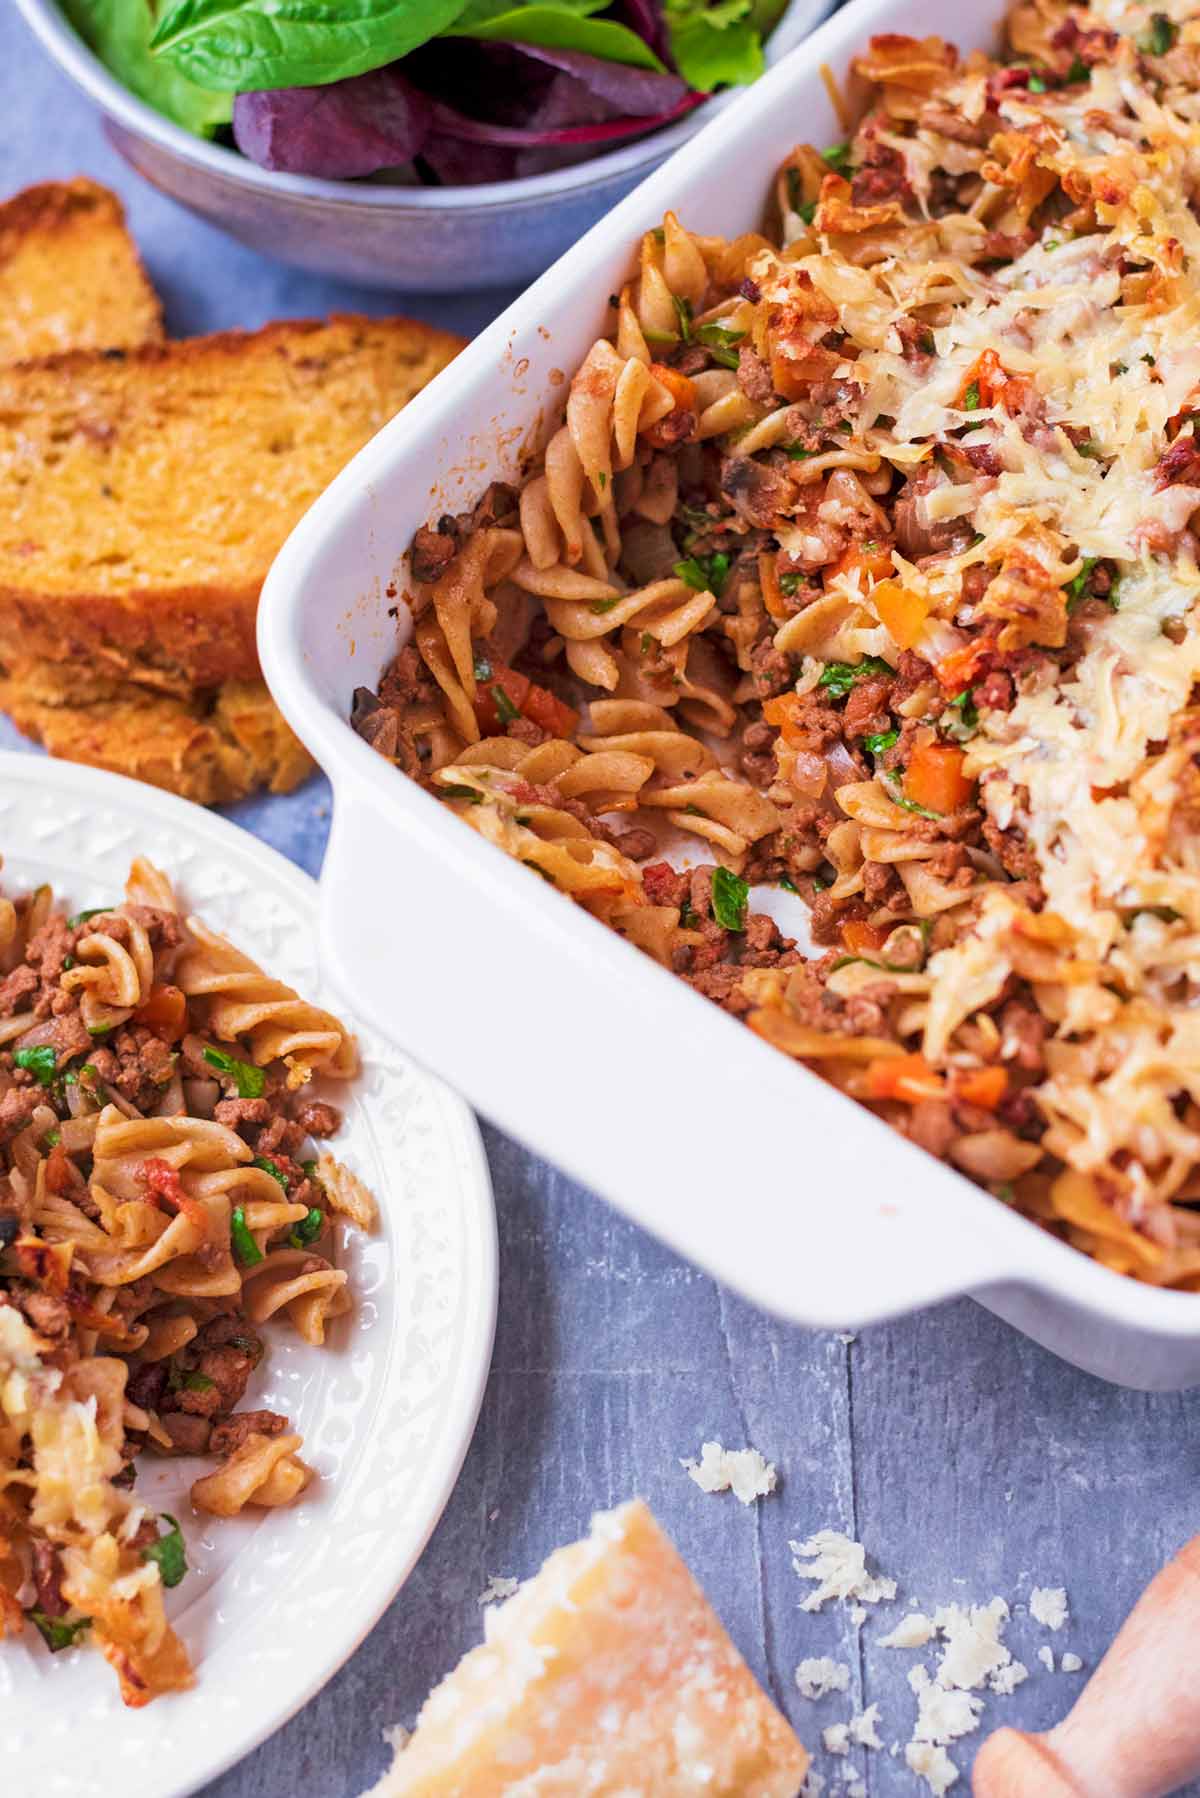 A baking dish of pasta bake with a portion removed.